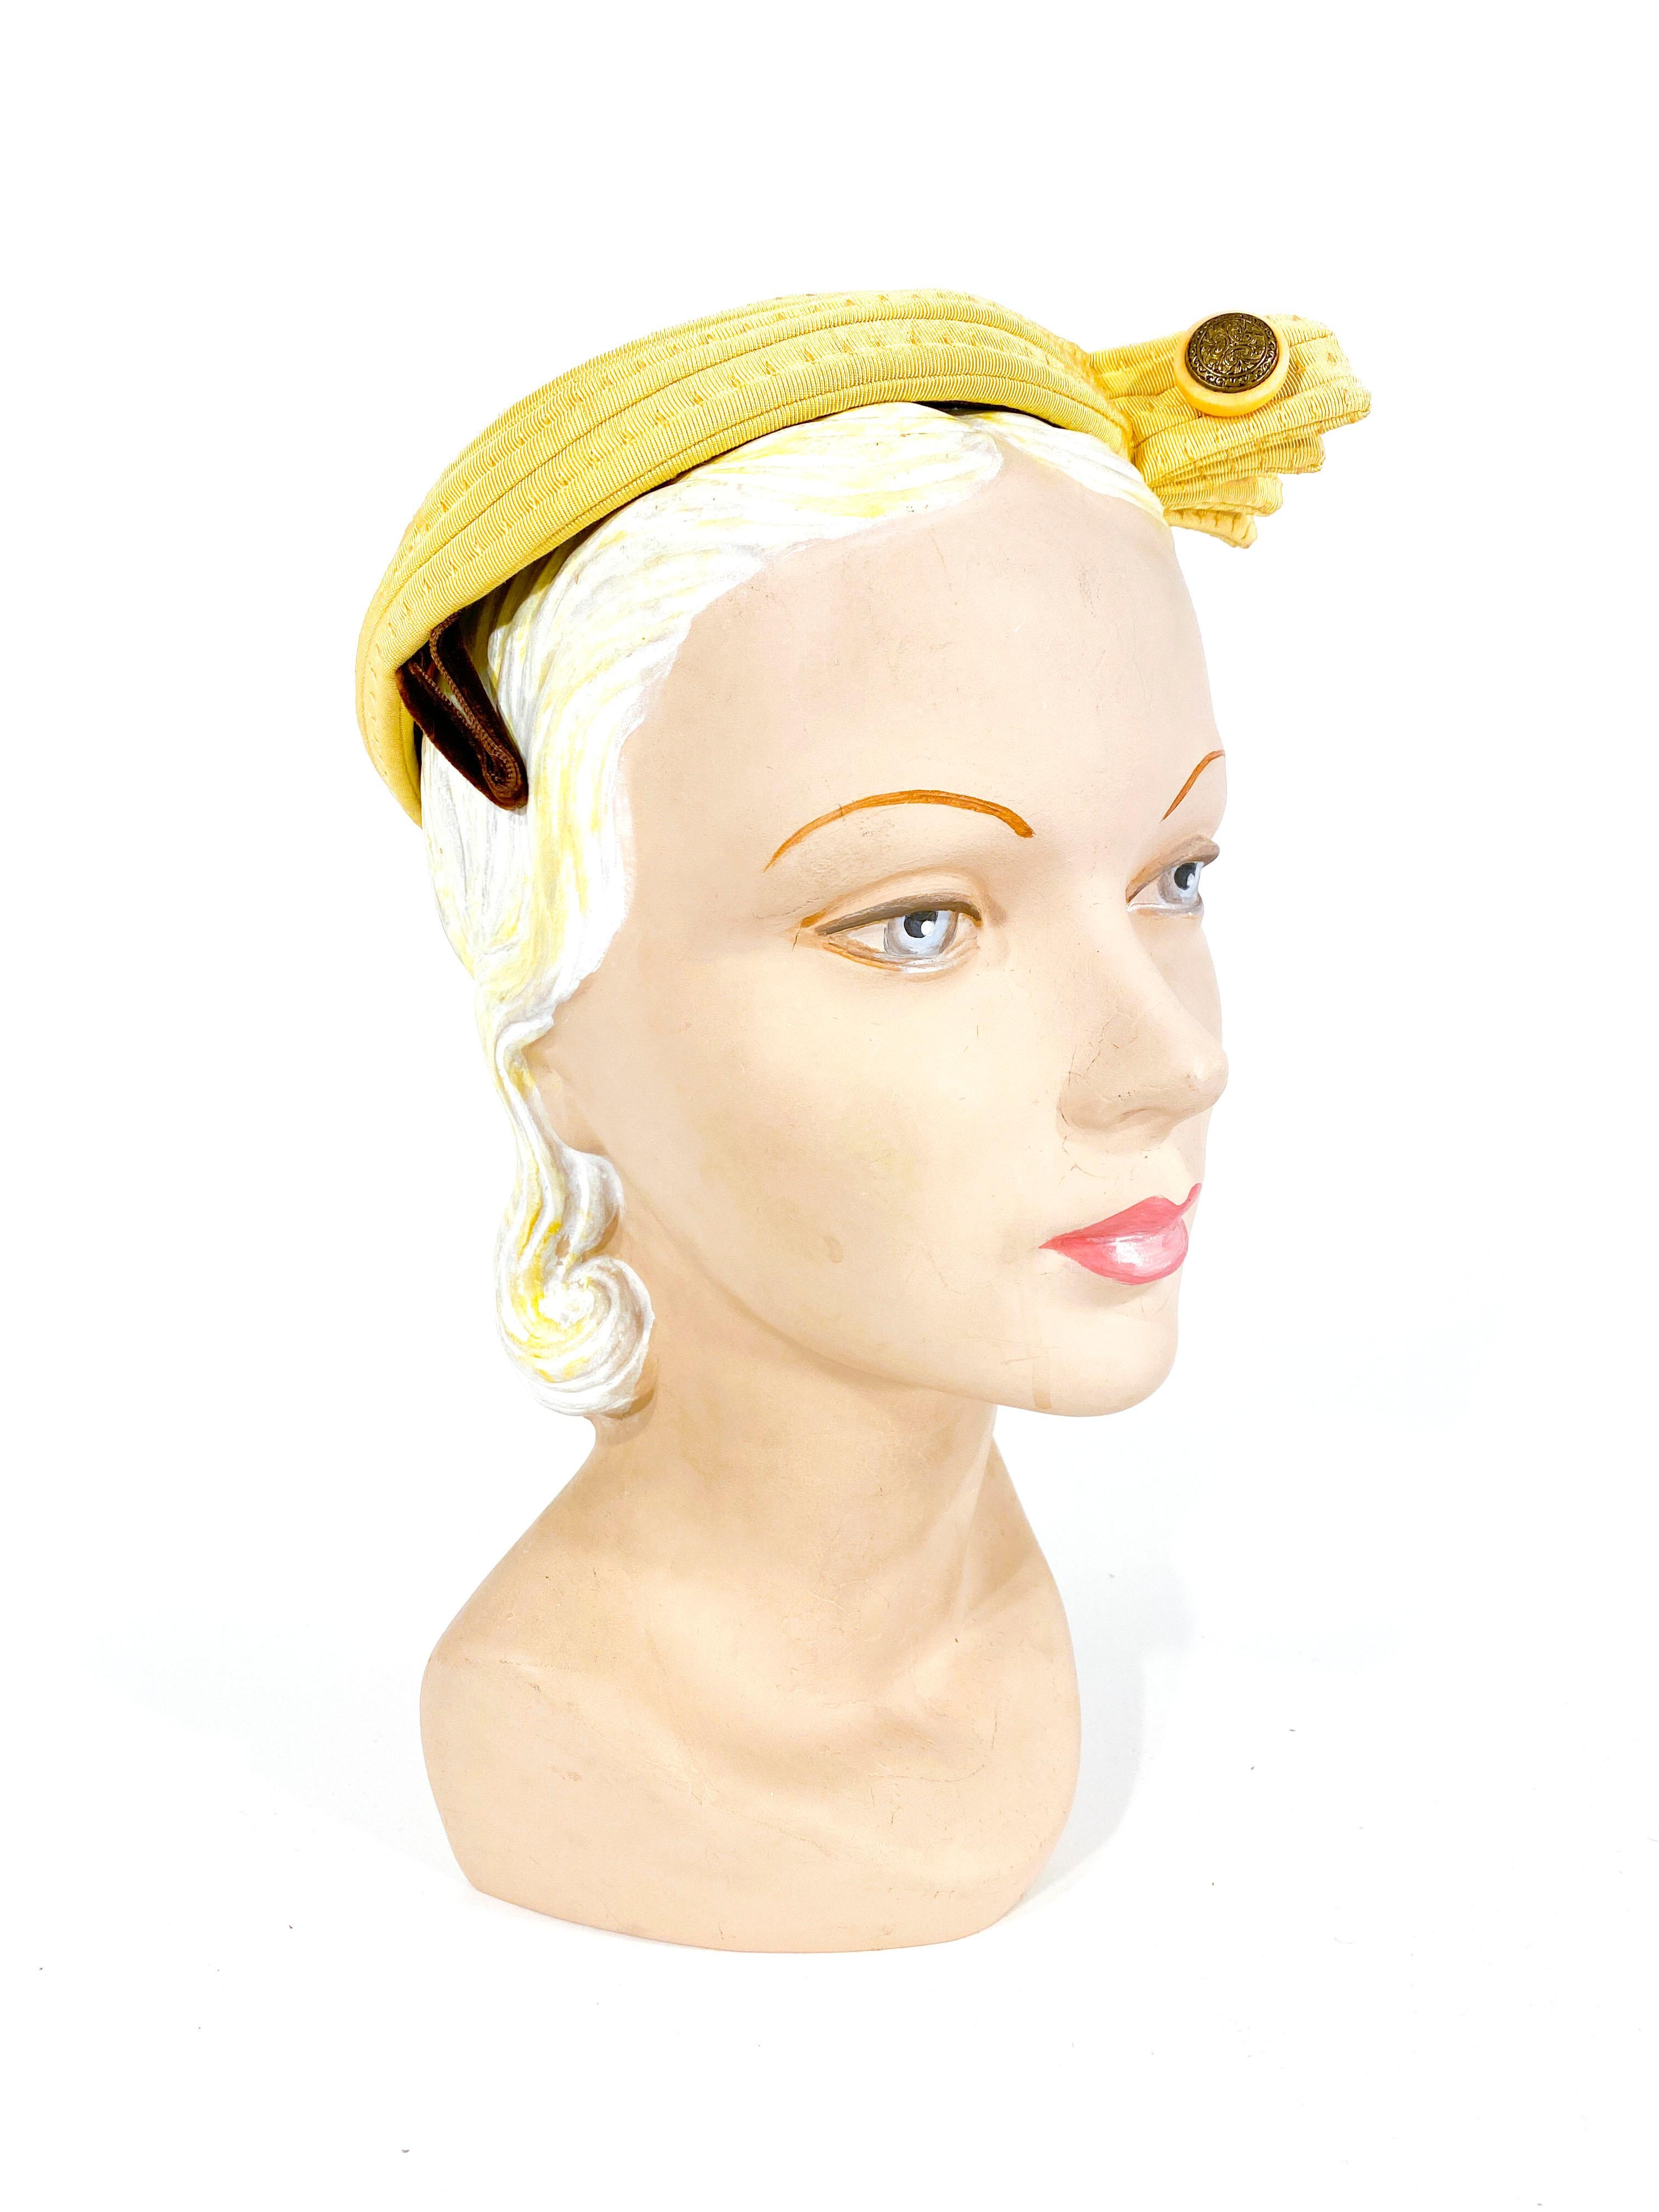 1950s soft yellow hat made of rolled grosgrain in a snail pattern finishing at the top. Each row of grosgrain is topstitched and the front of the hat an off centered wing adorned with an etched brass button. The frame of this hat is wired for shape